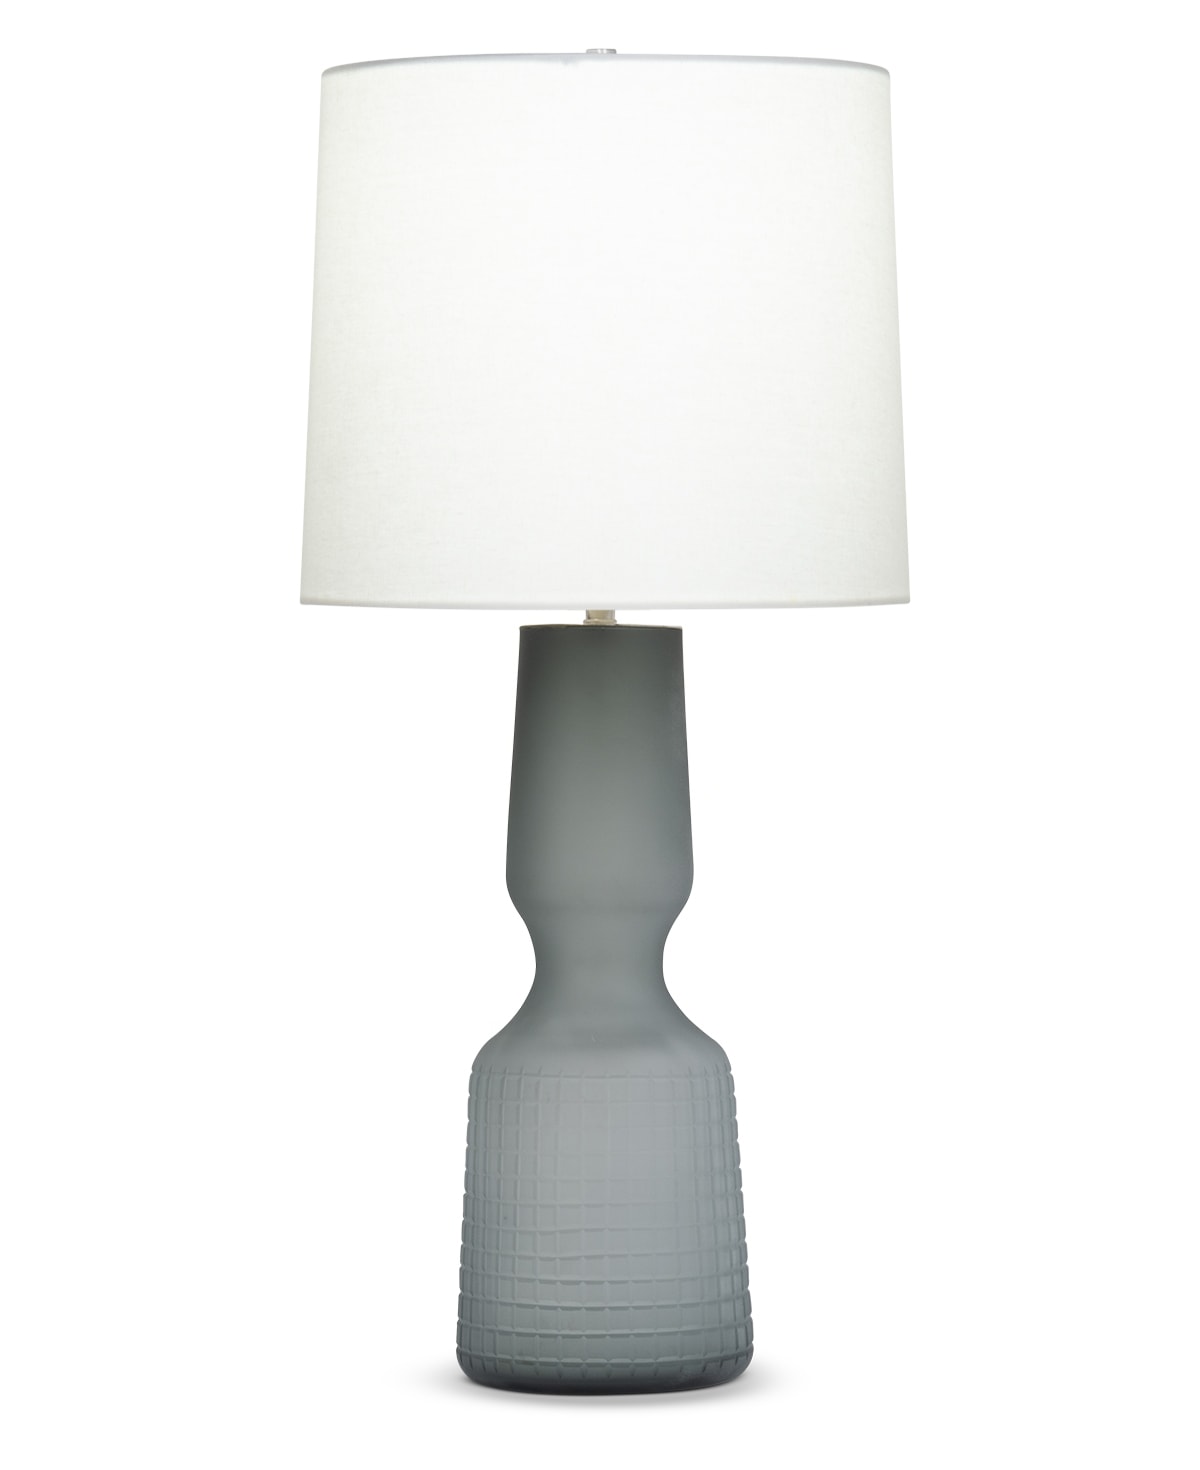 FlowDecor Craine Table Lamp in glass with smokey grey and off-white linen tapered drum shade (# 4577)